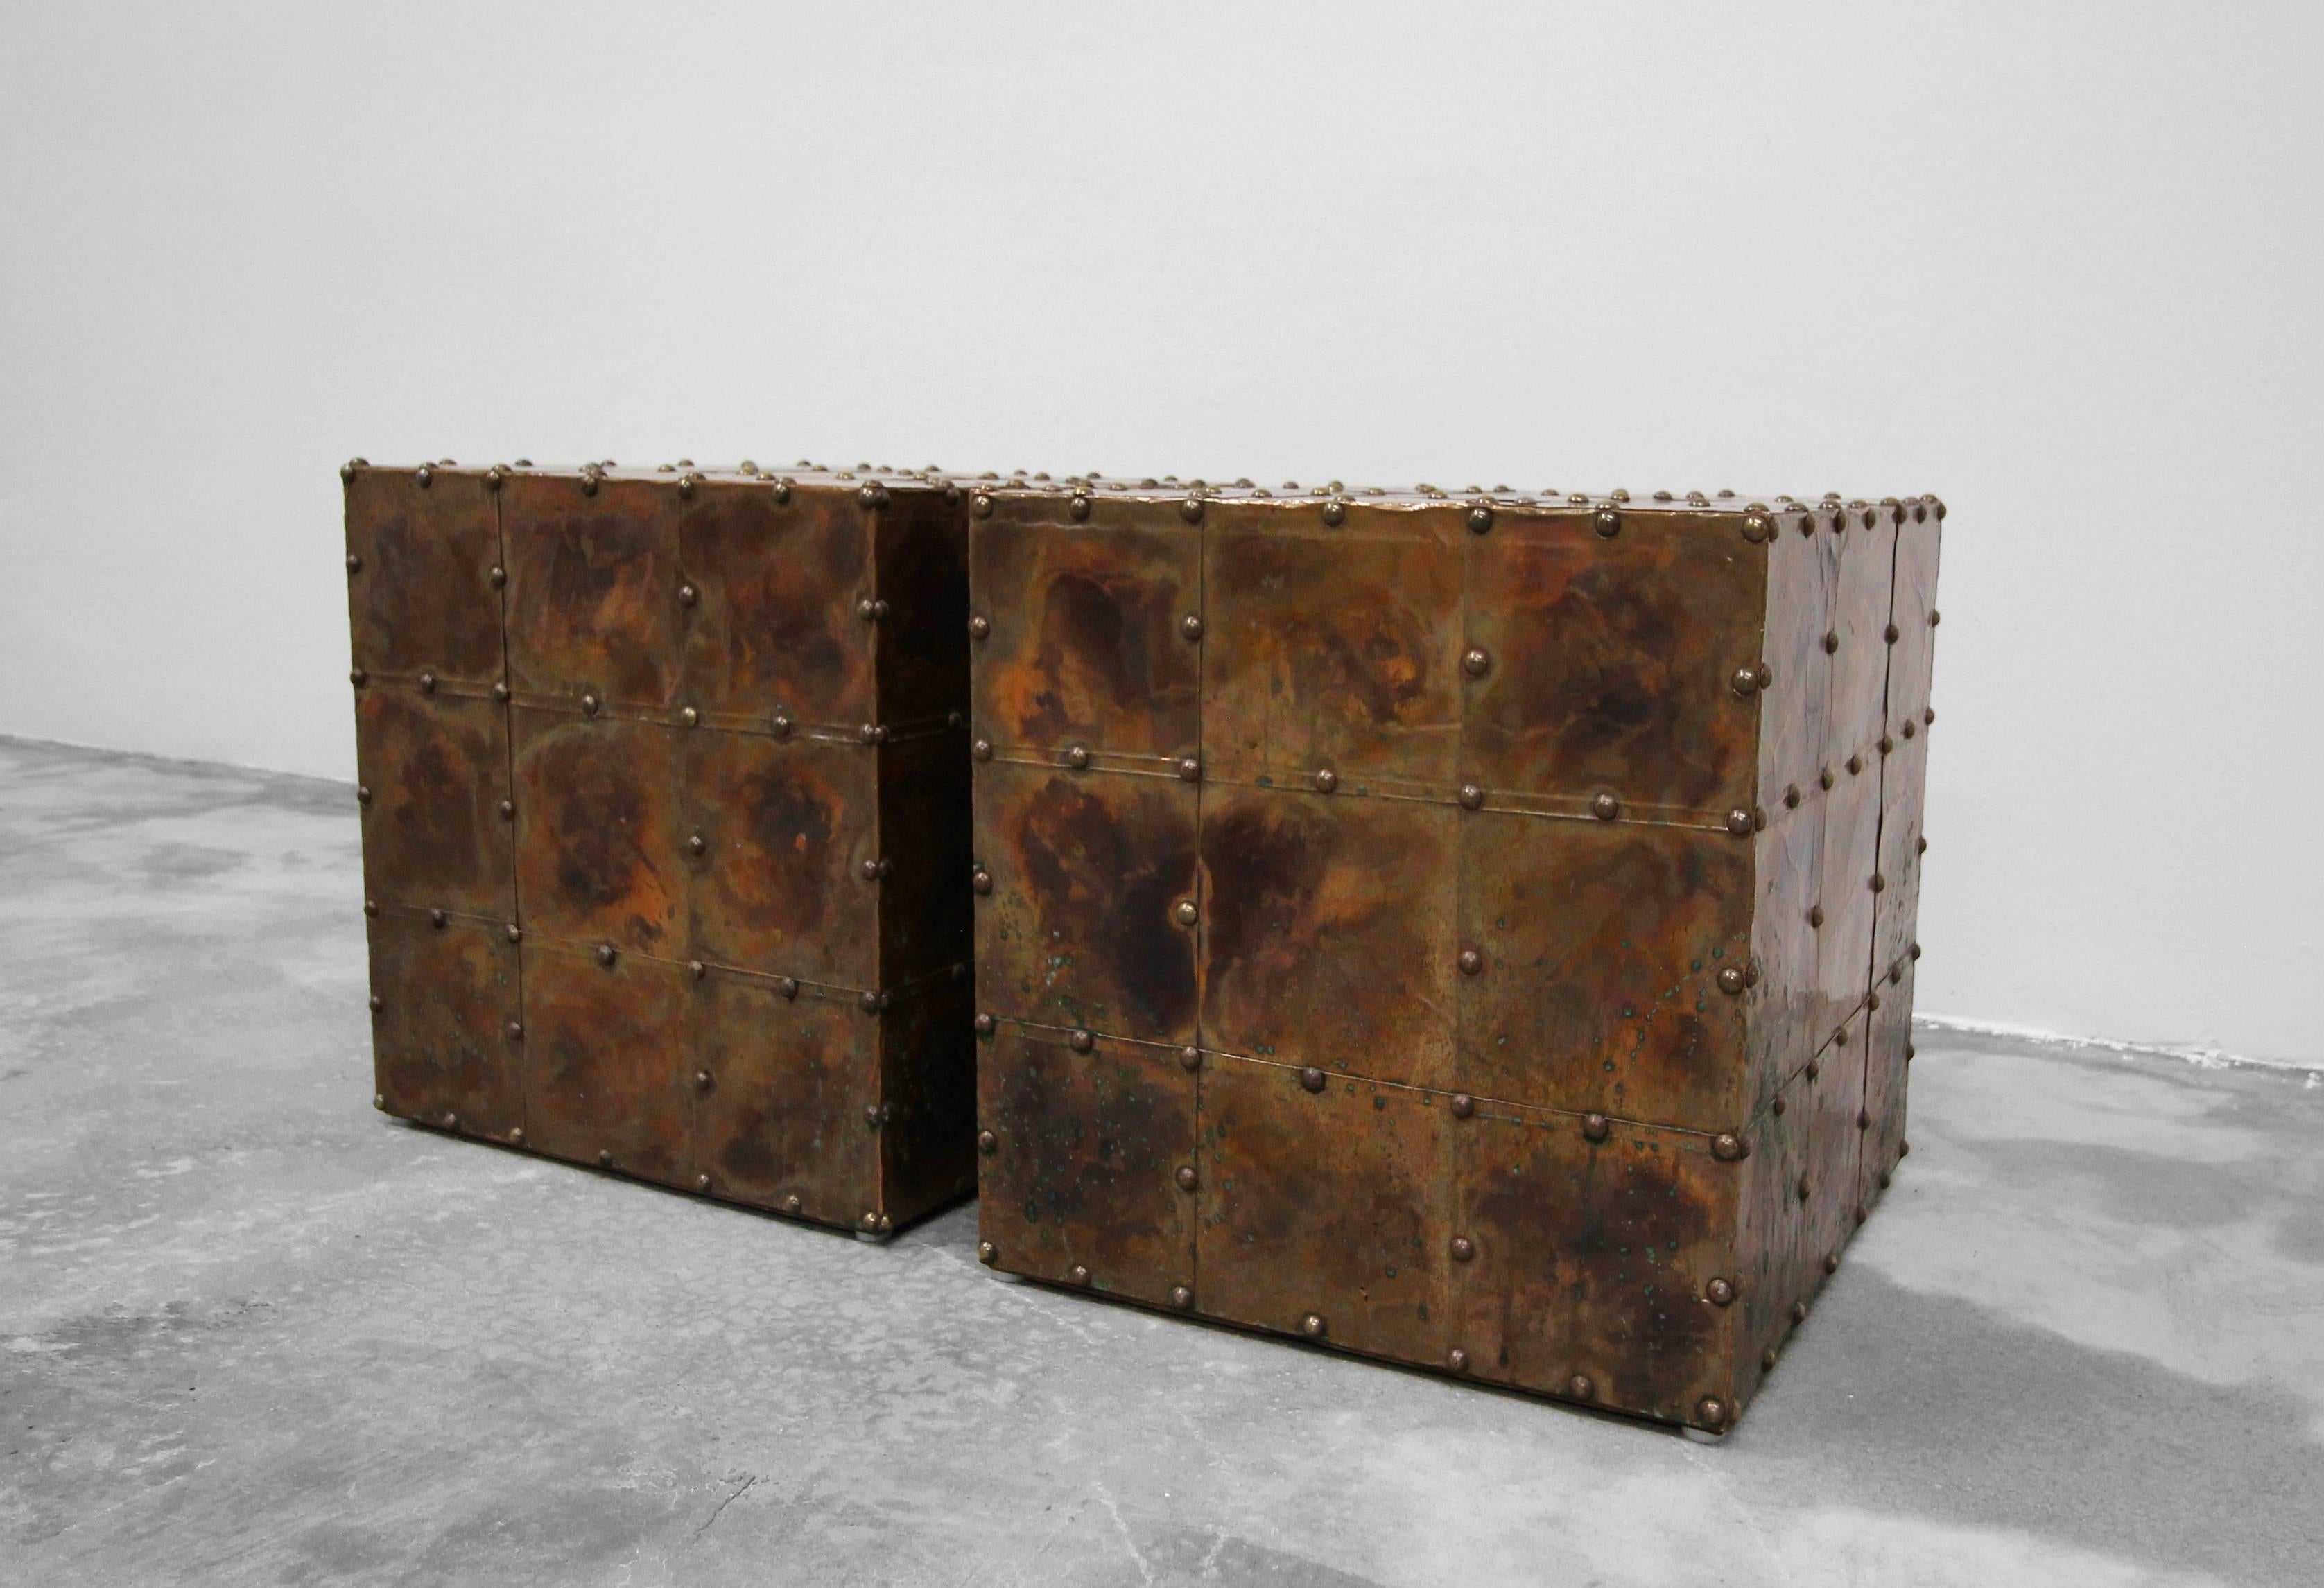 20th Century Pair of Patinaed Copper Cube Side Tables Made in Spain by Sarreid